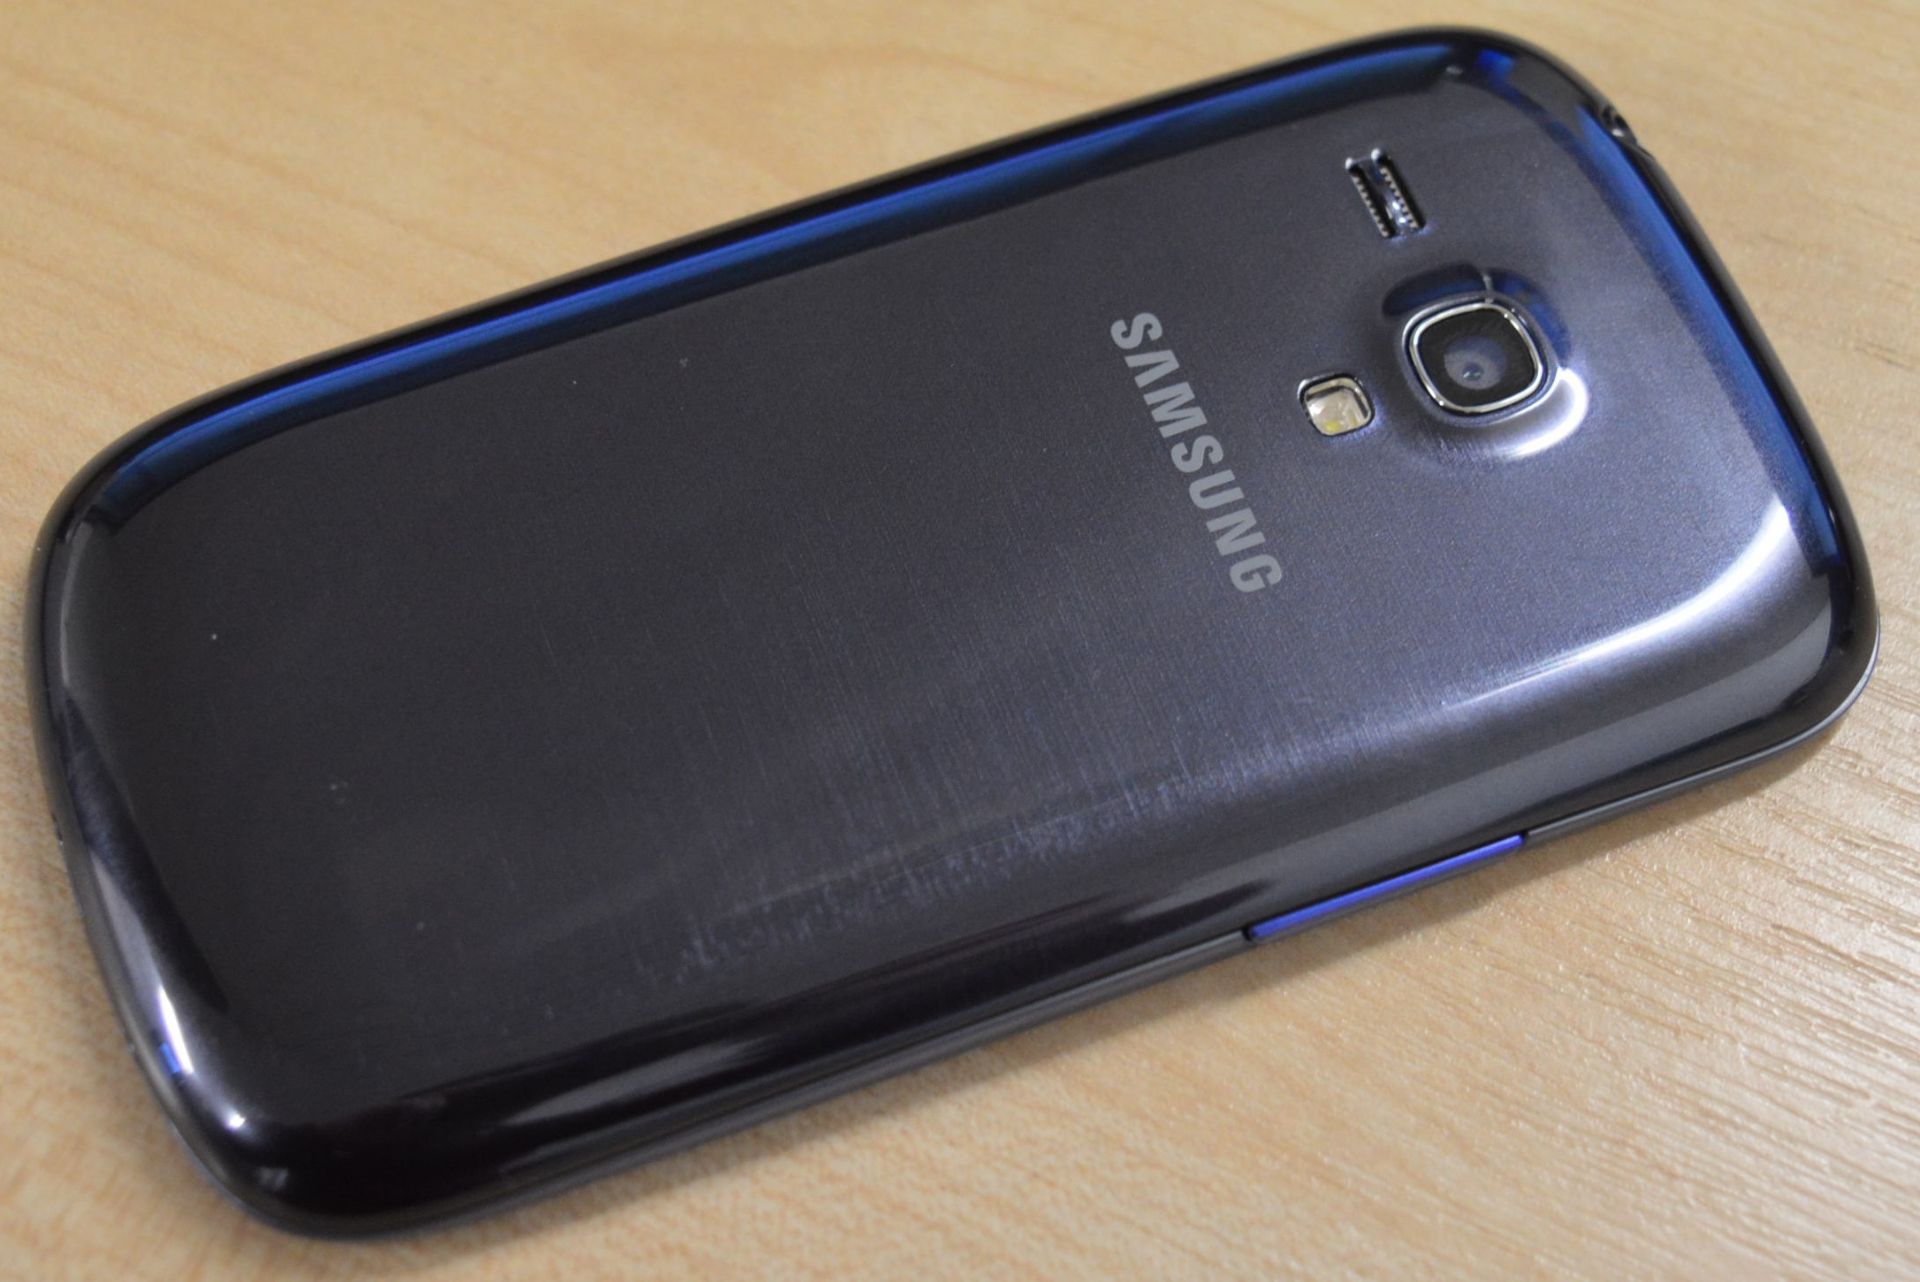 1 x Samsung Galaxy S3 Mini Mobile Phone - Pebble Blue - GT-18200N - Features Dual Core 1ghz - Image 2 of 4